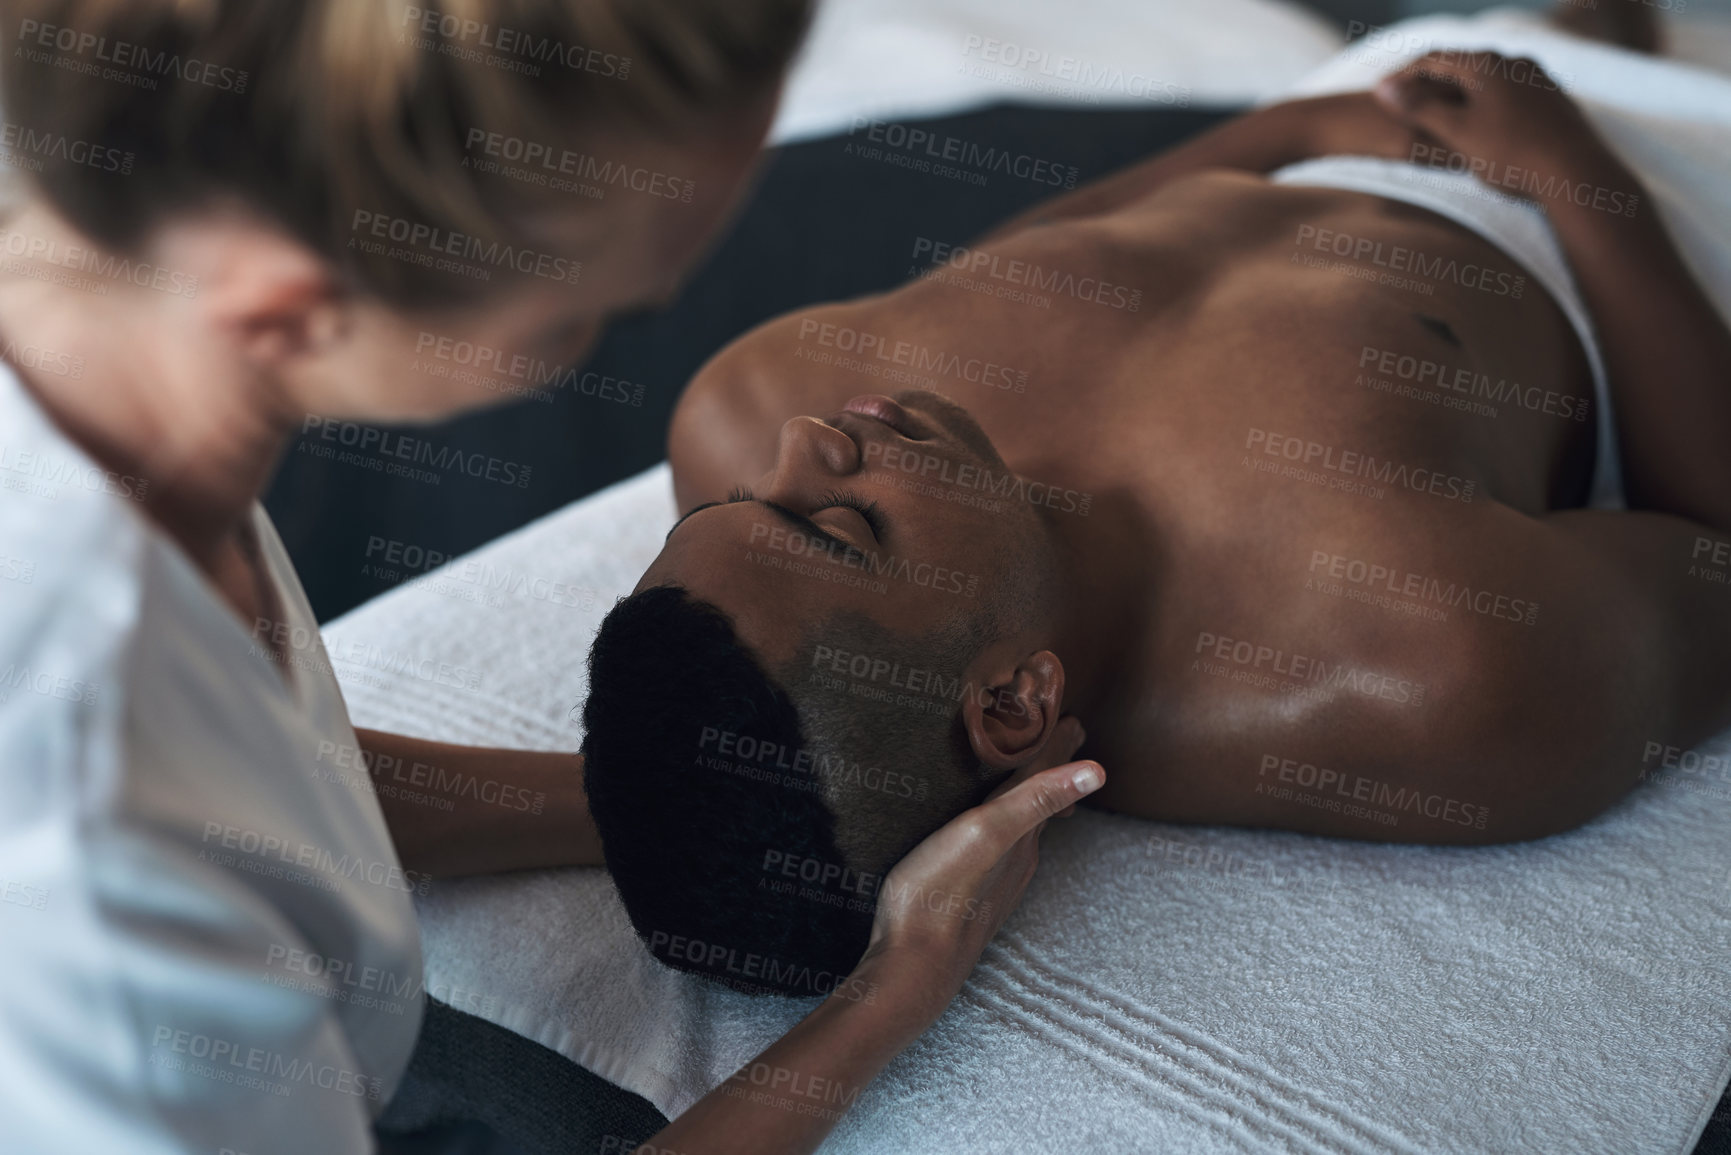 Buy stock photo Shot of a young man getting a face massage at a spa